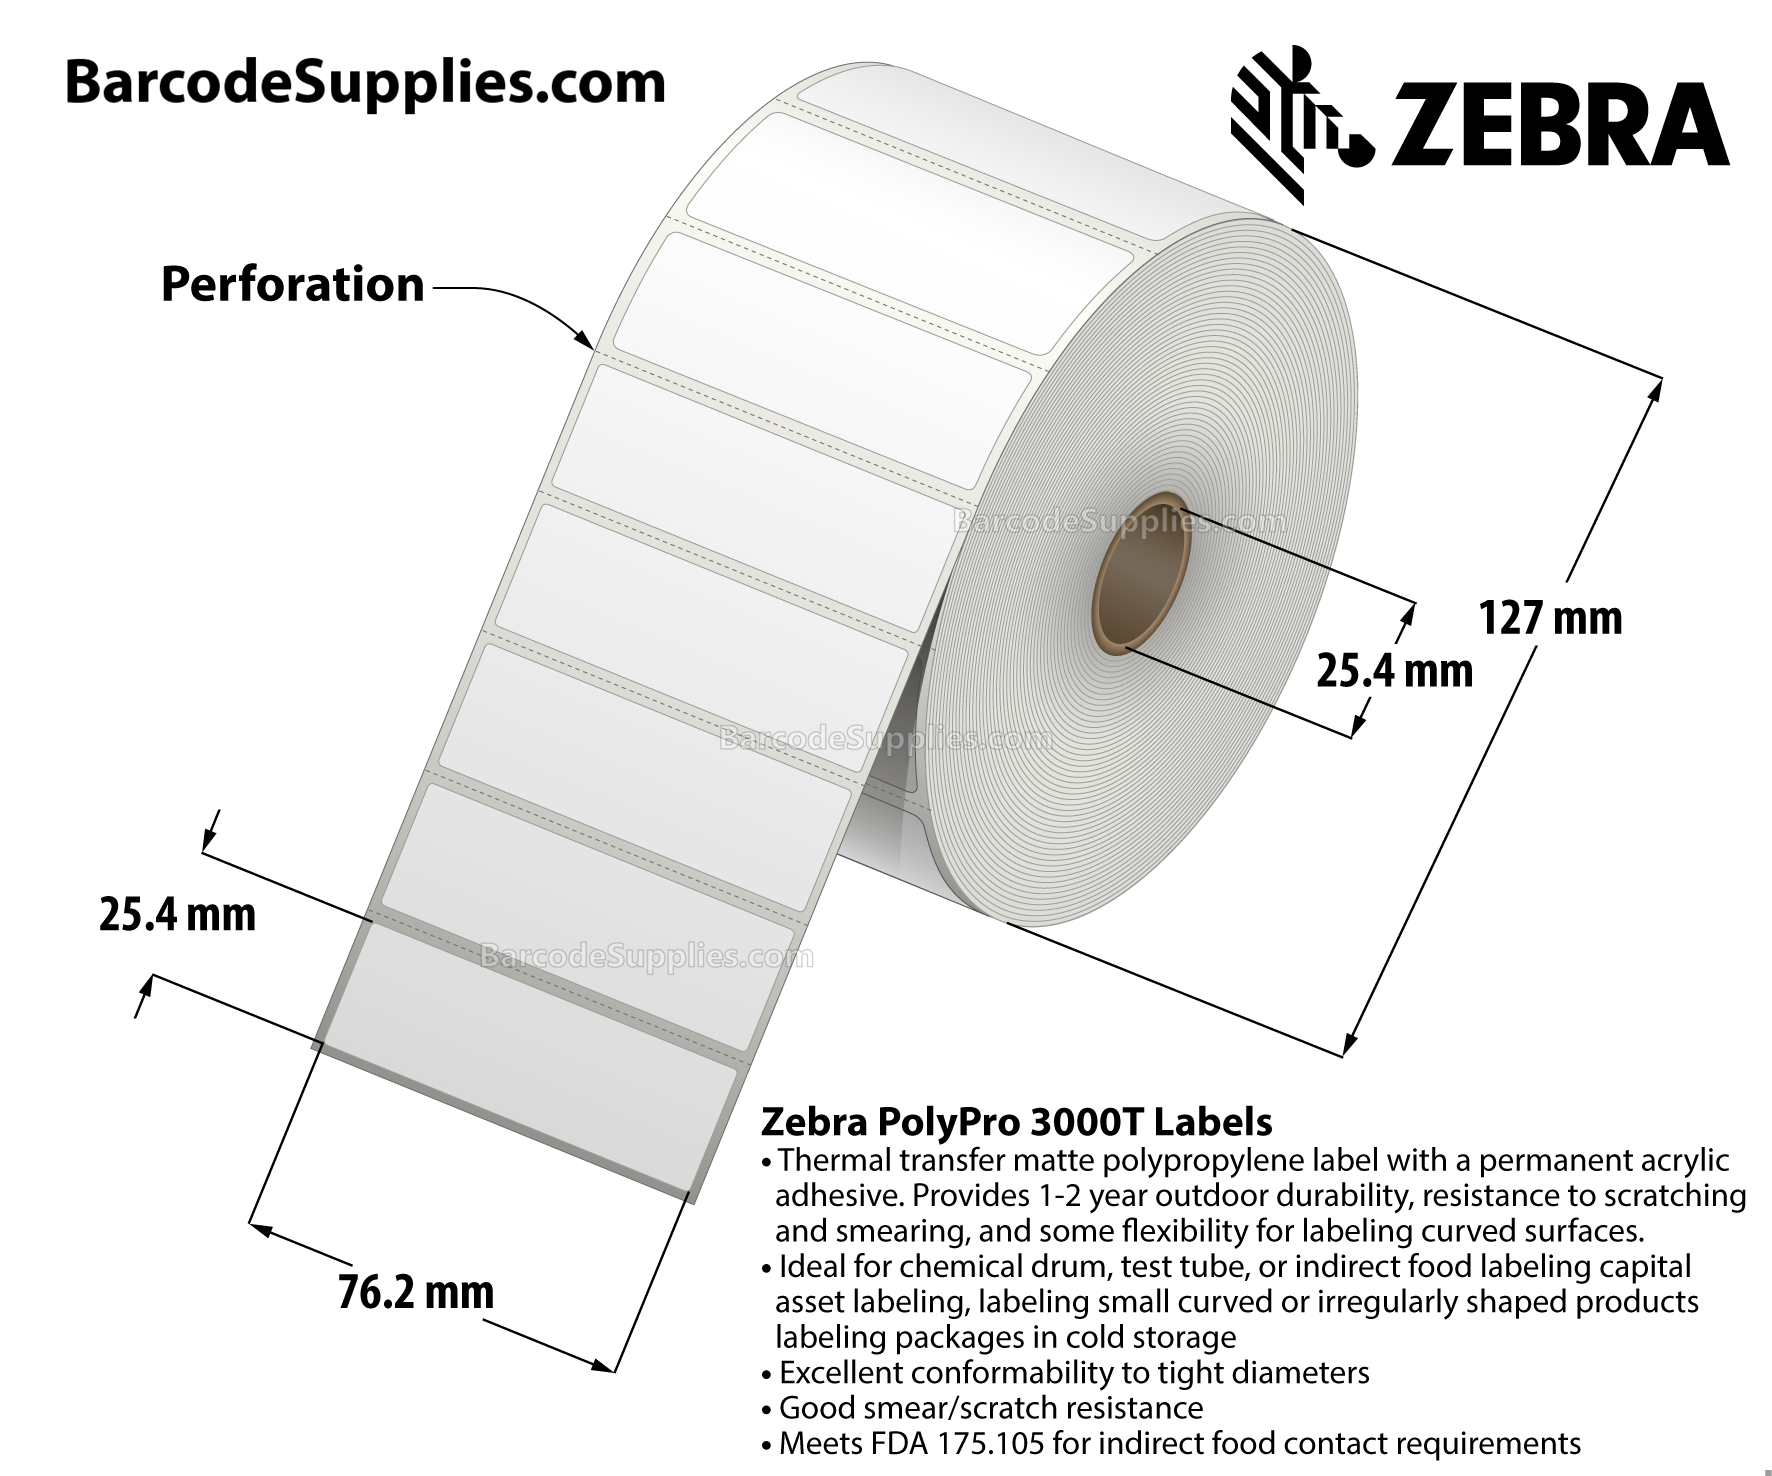 3 x 1 Thermal Transfer White PolyPro 3000T Labels With Permanent Adhesive - Perforated - 2100 Labels Per Roll - Carton Of 8 Rolls - 16800 Labels Total - MPN: 18924